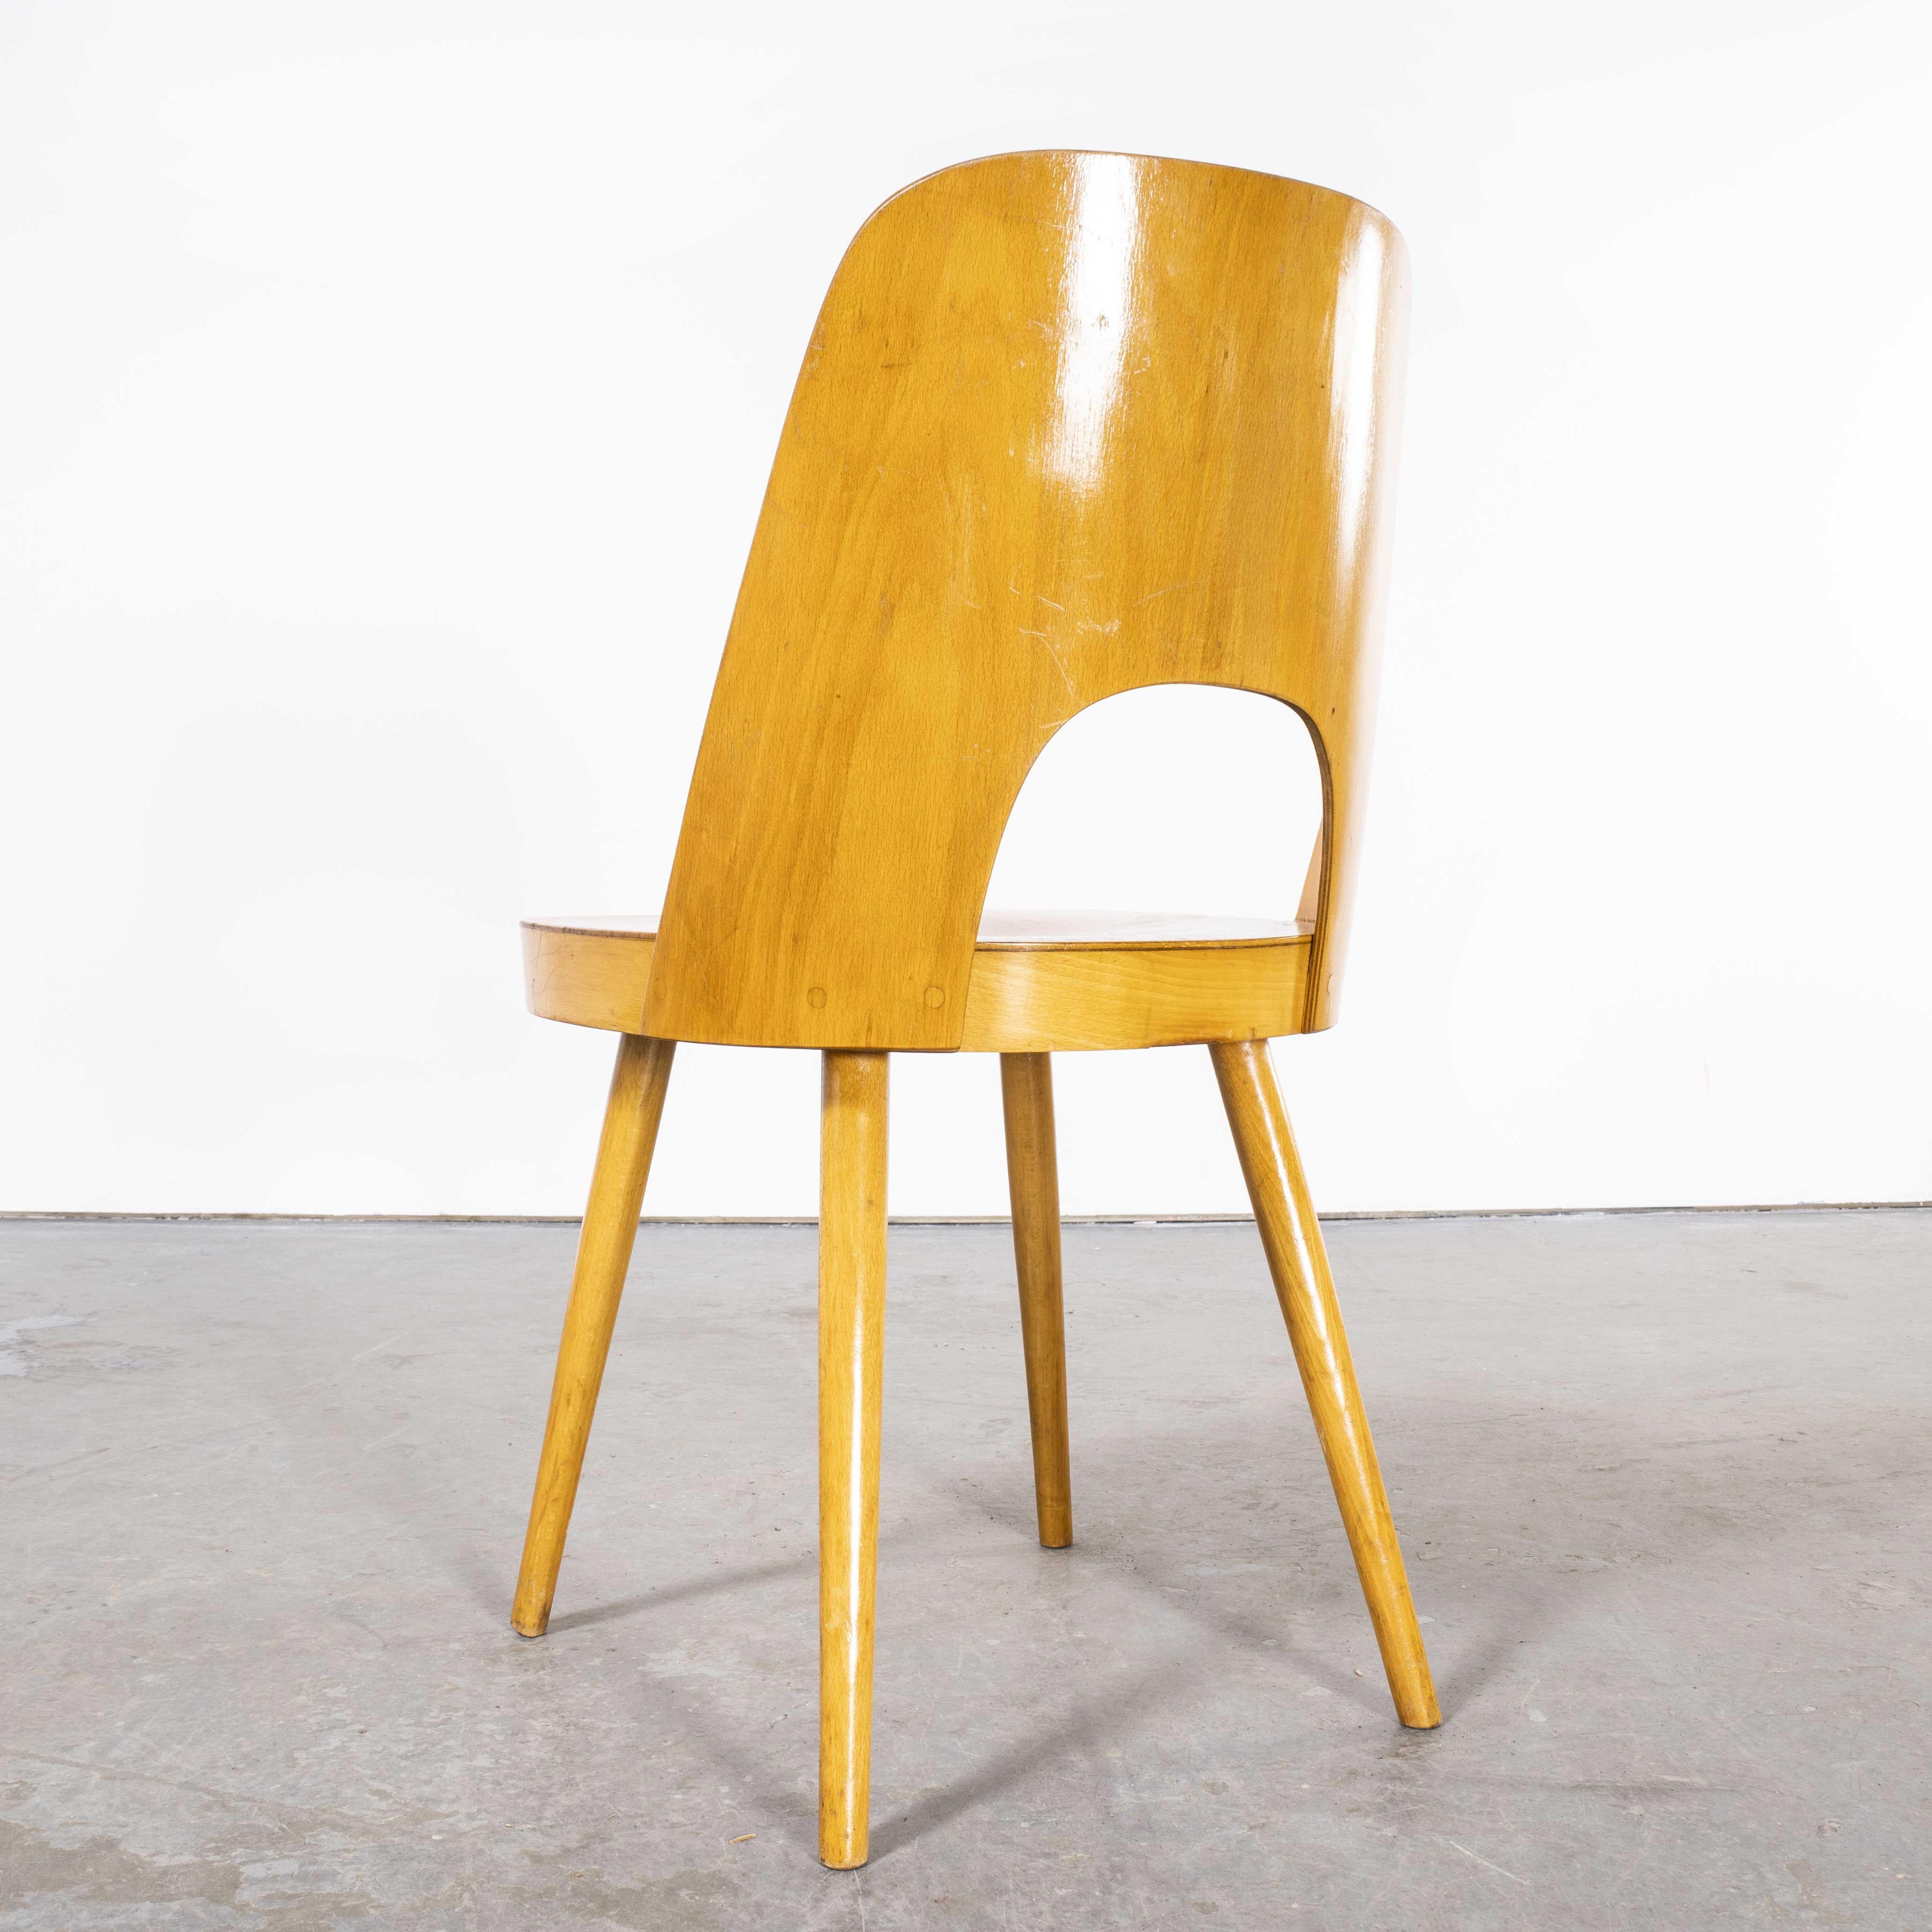 1950’s Honey Beech side chair – Oswald Haerdtl Model 515 – set of six (1928)
1950’s Honey Beech side chair – Oswald Haerdtl Model 515 – set of six (1928). This chair was produced by the famous Czech firm Ton, still trading today and producing